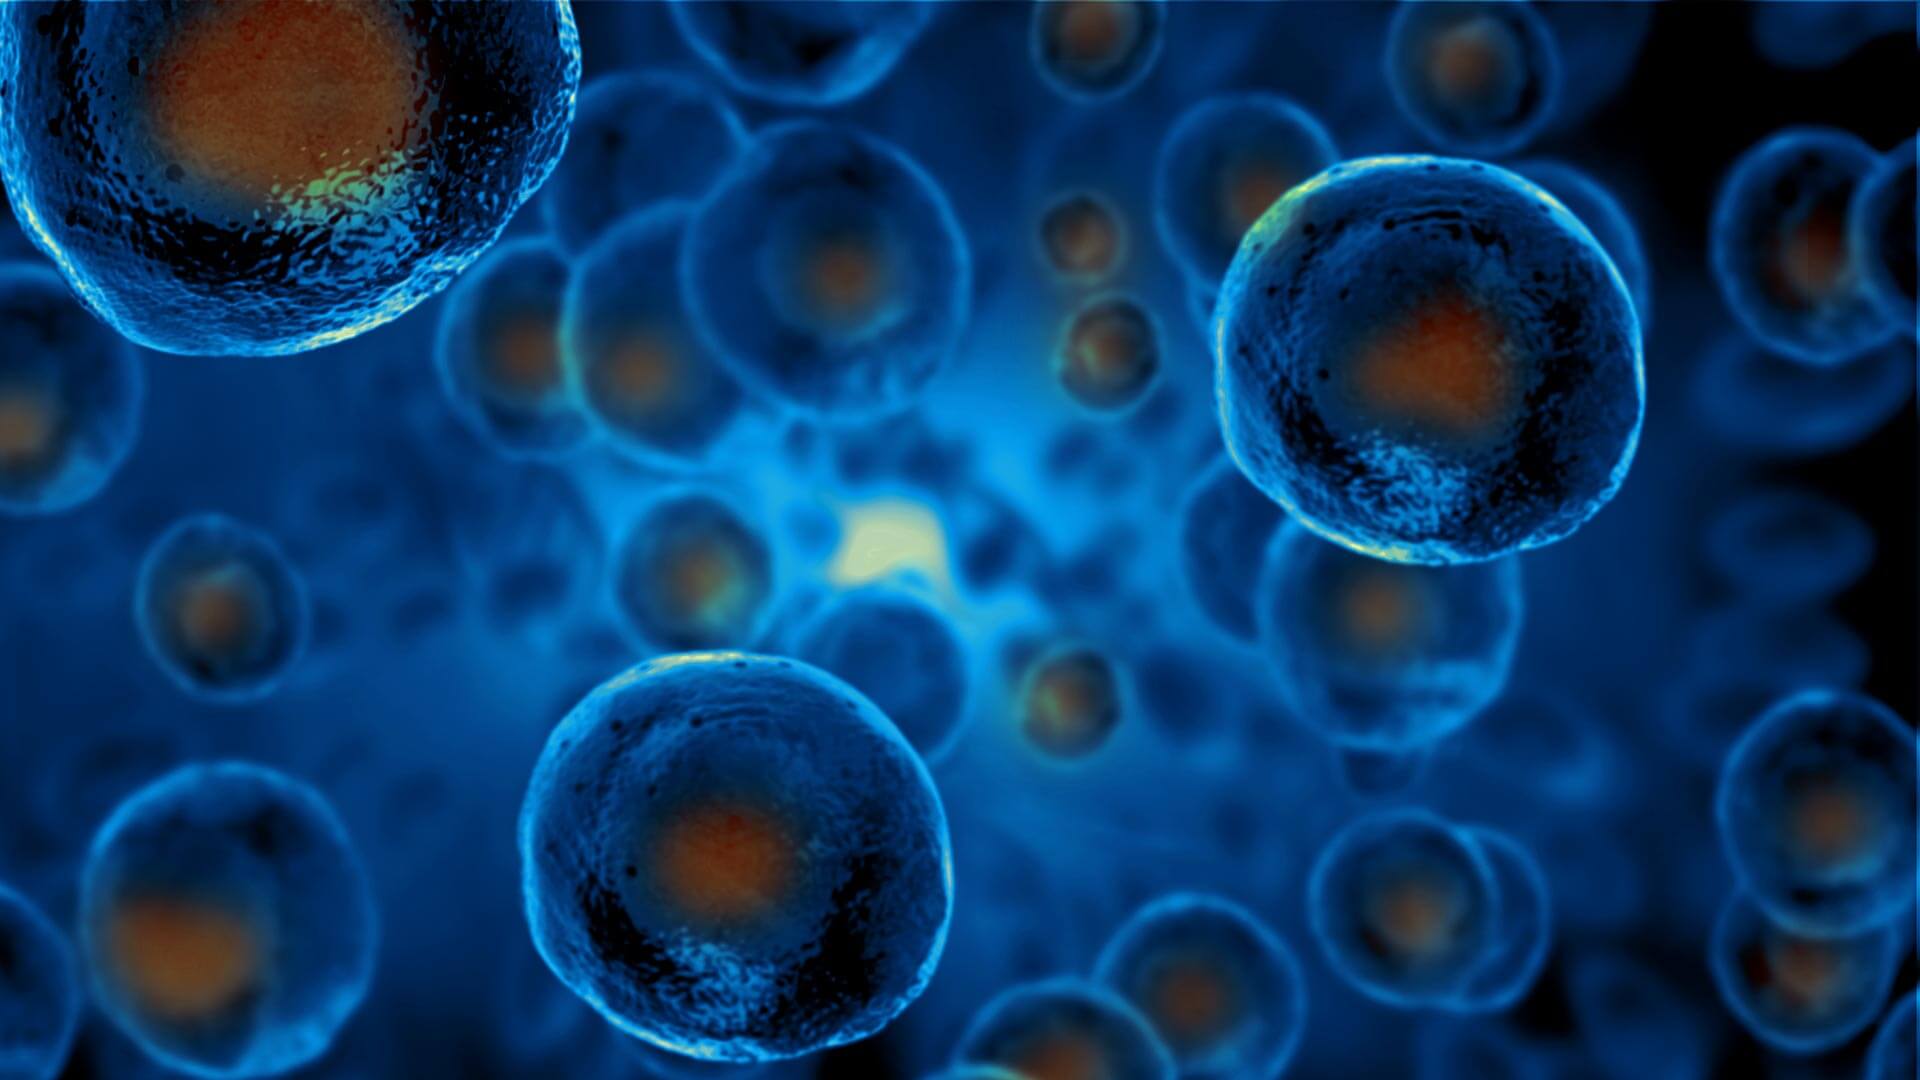 Stem cells in the human body